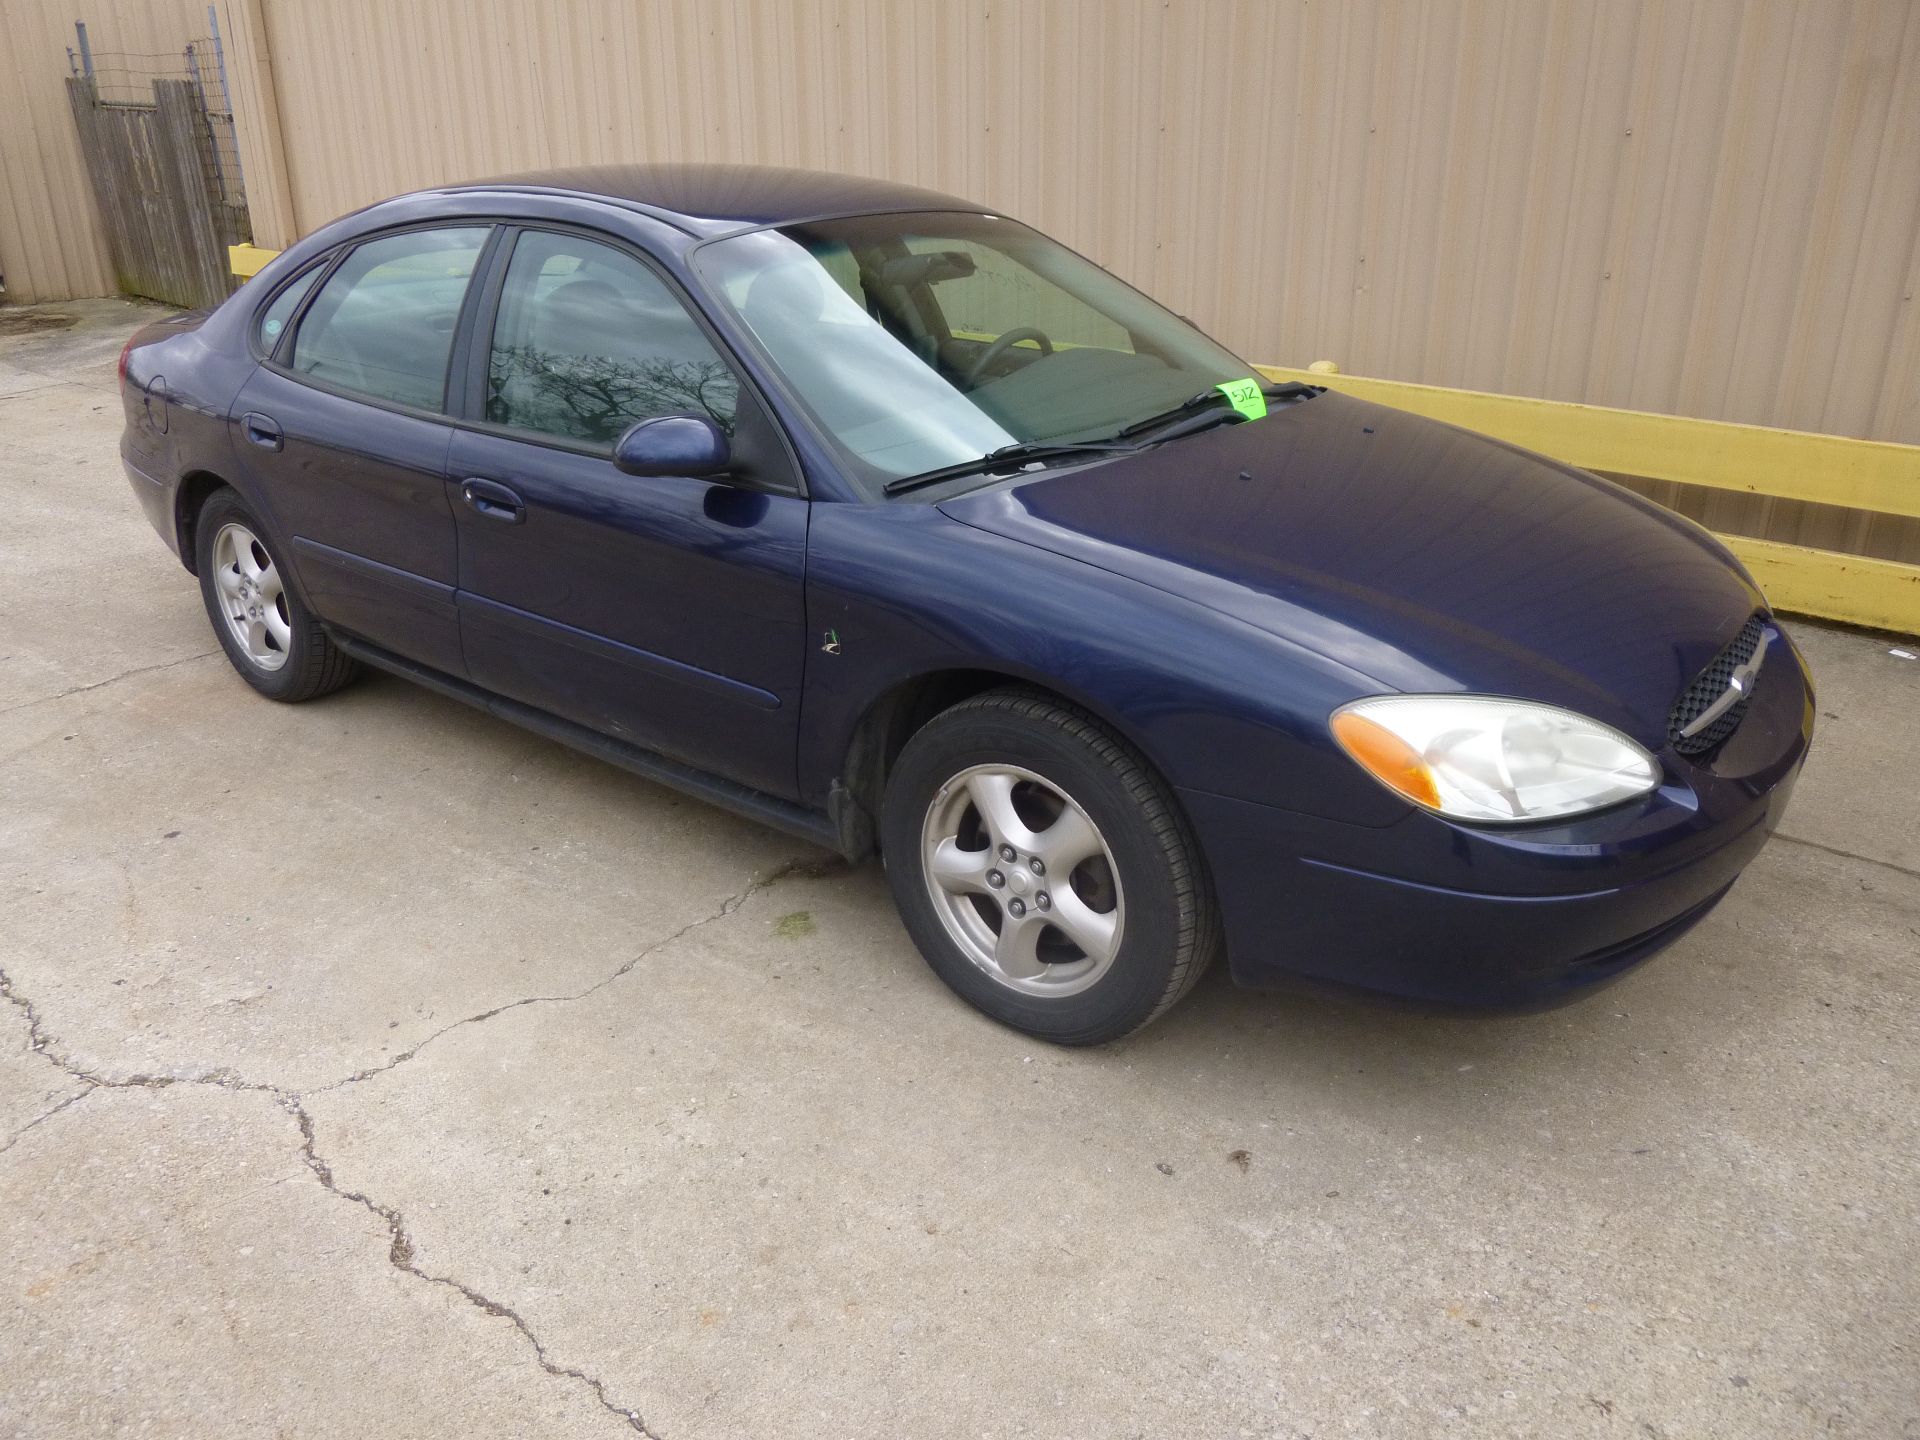 2002 Ford Taurus Municipally maintained Miles 92930 Vin # 1FAFP532X2G180779 CLEAR TITLE(located at